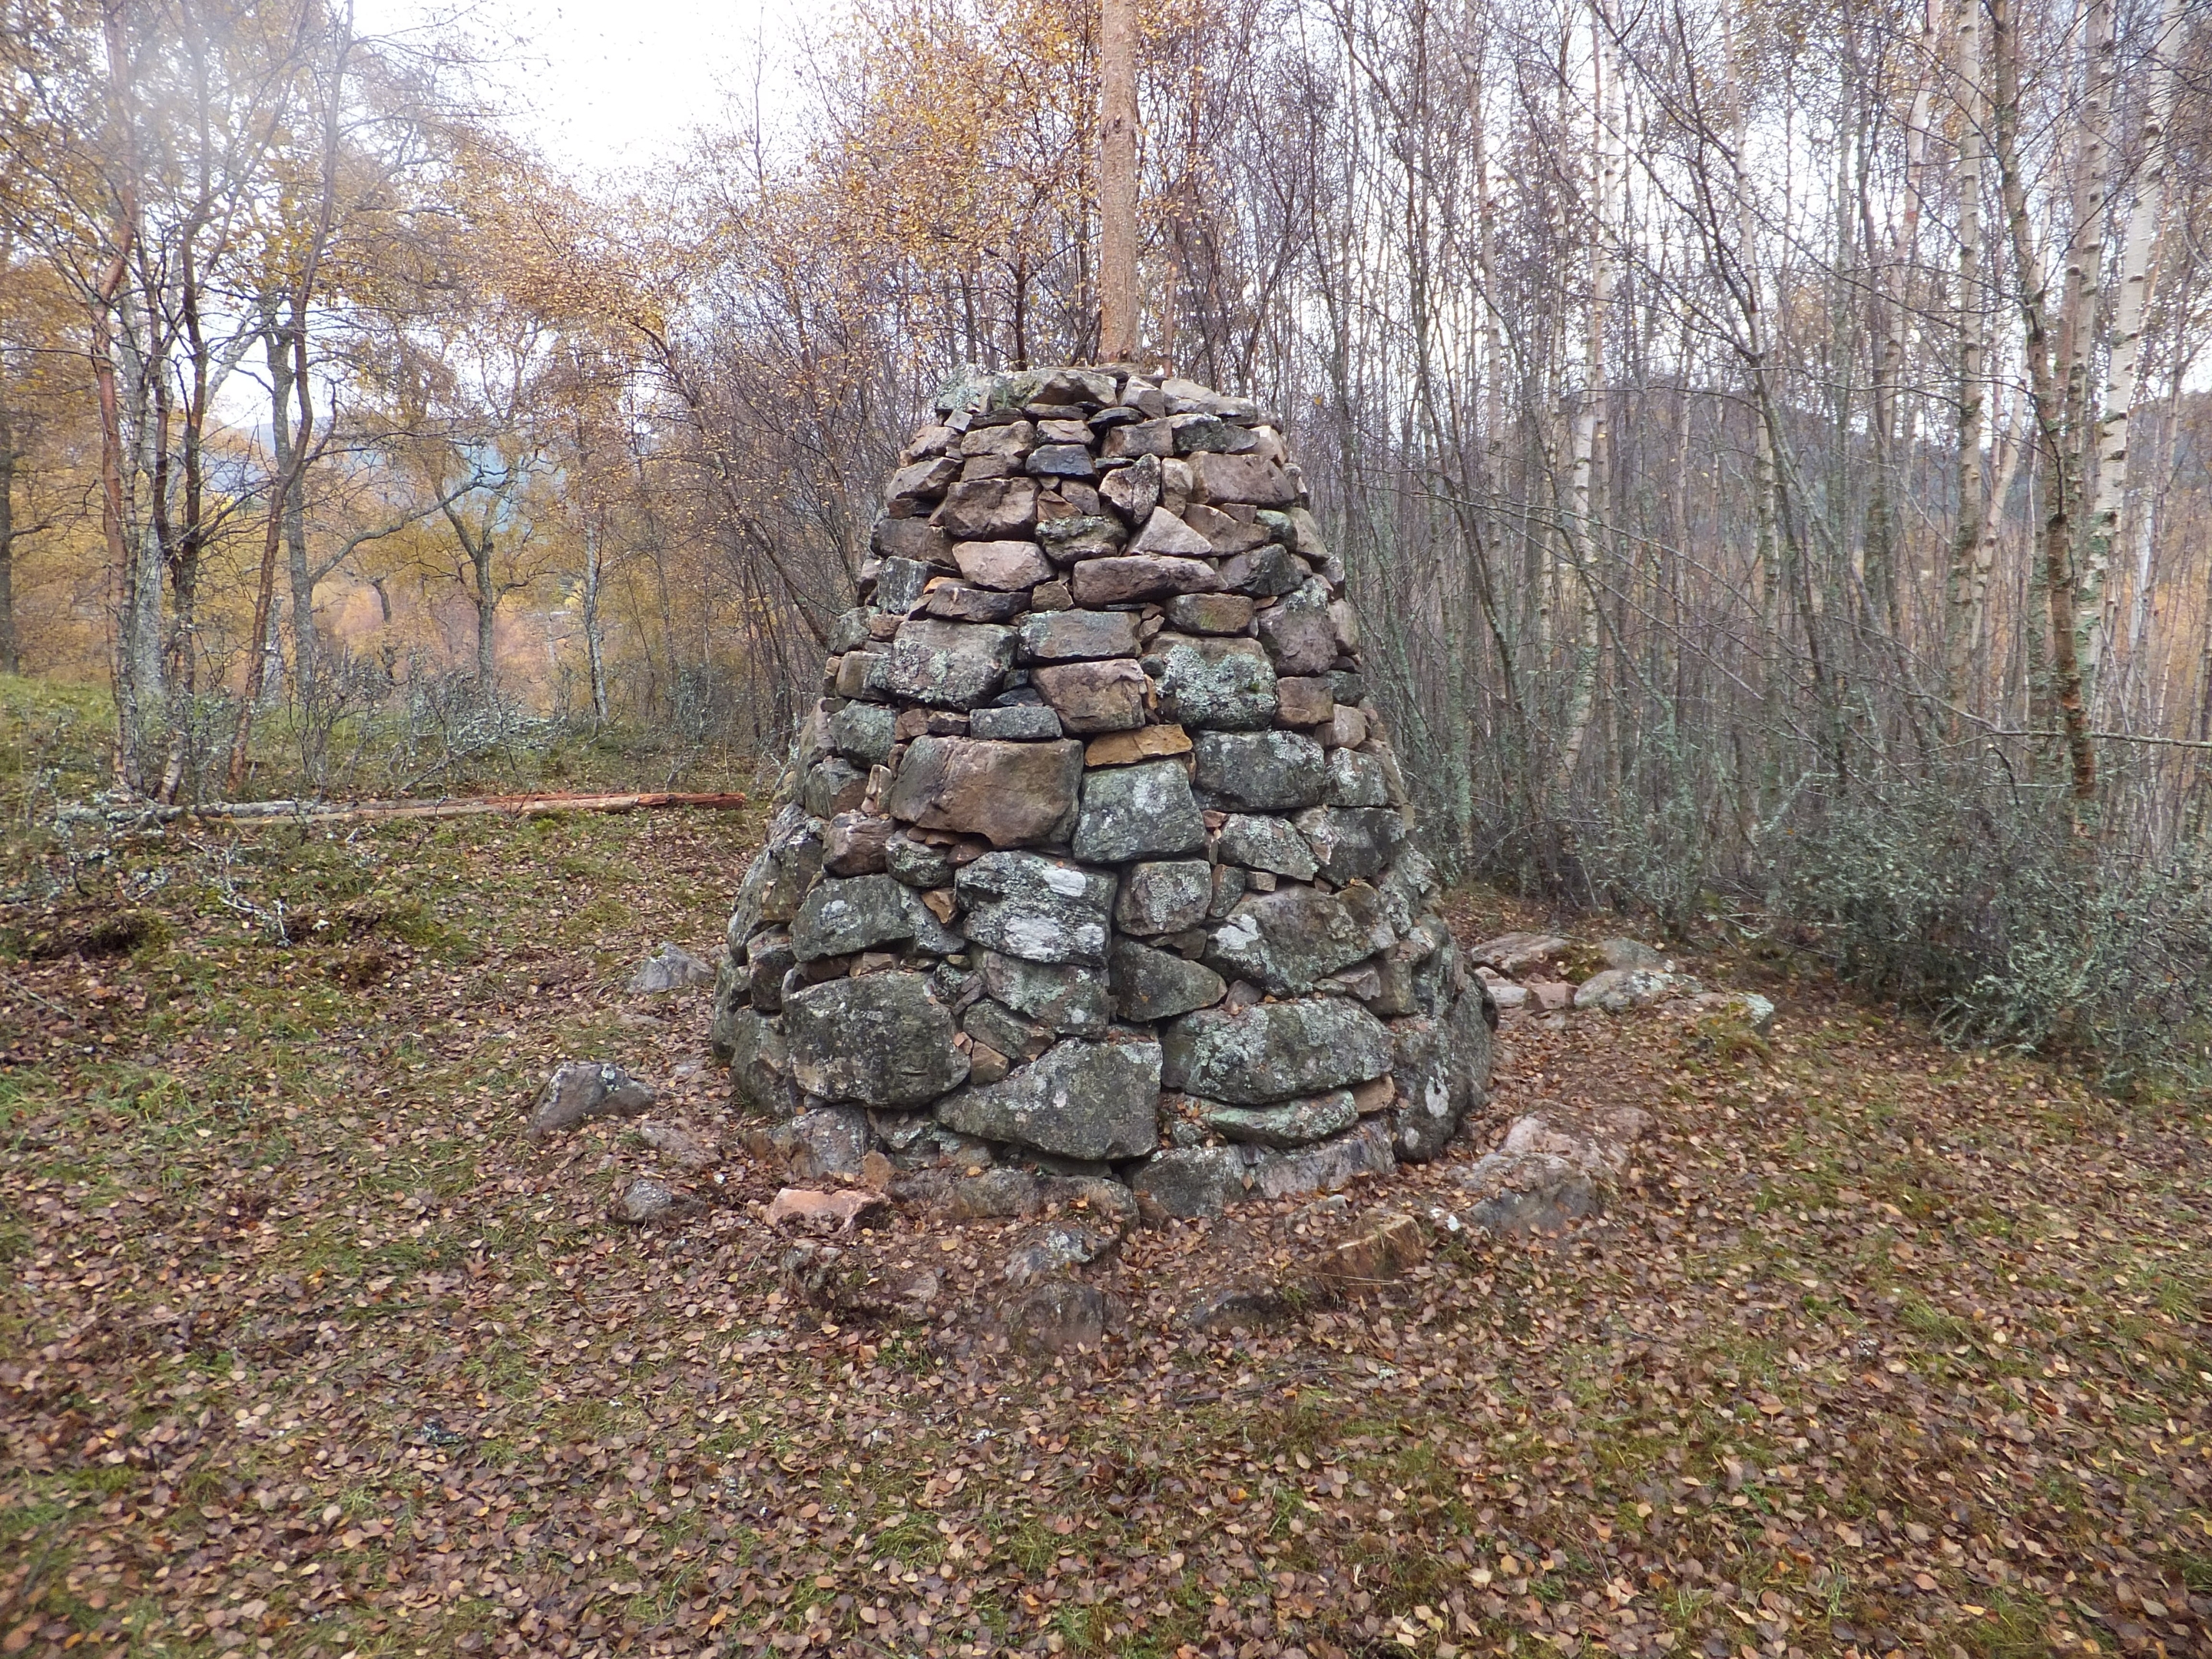 A mystery cairn has been discovered during works to improve a golf course.